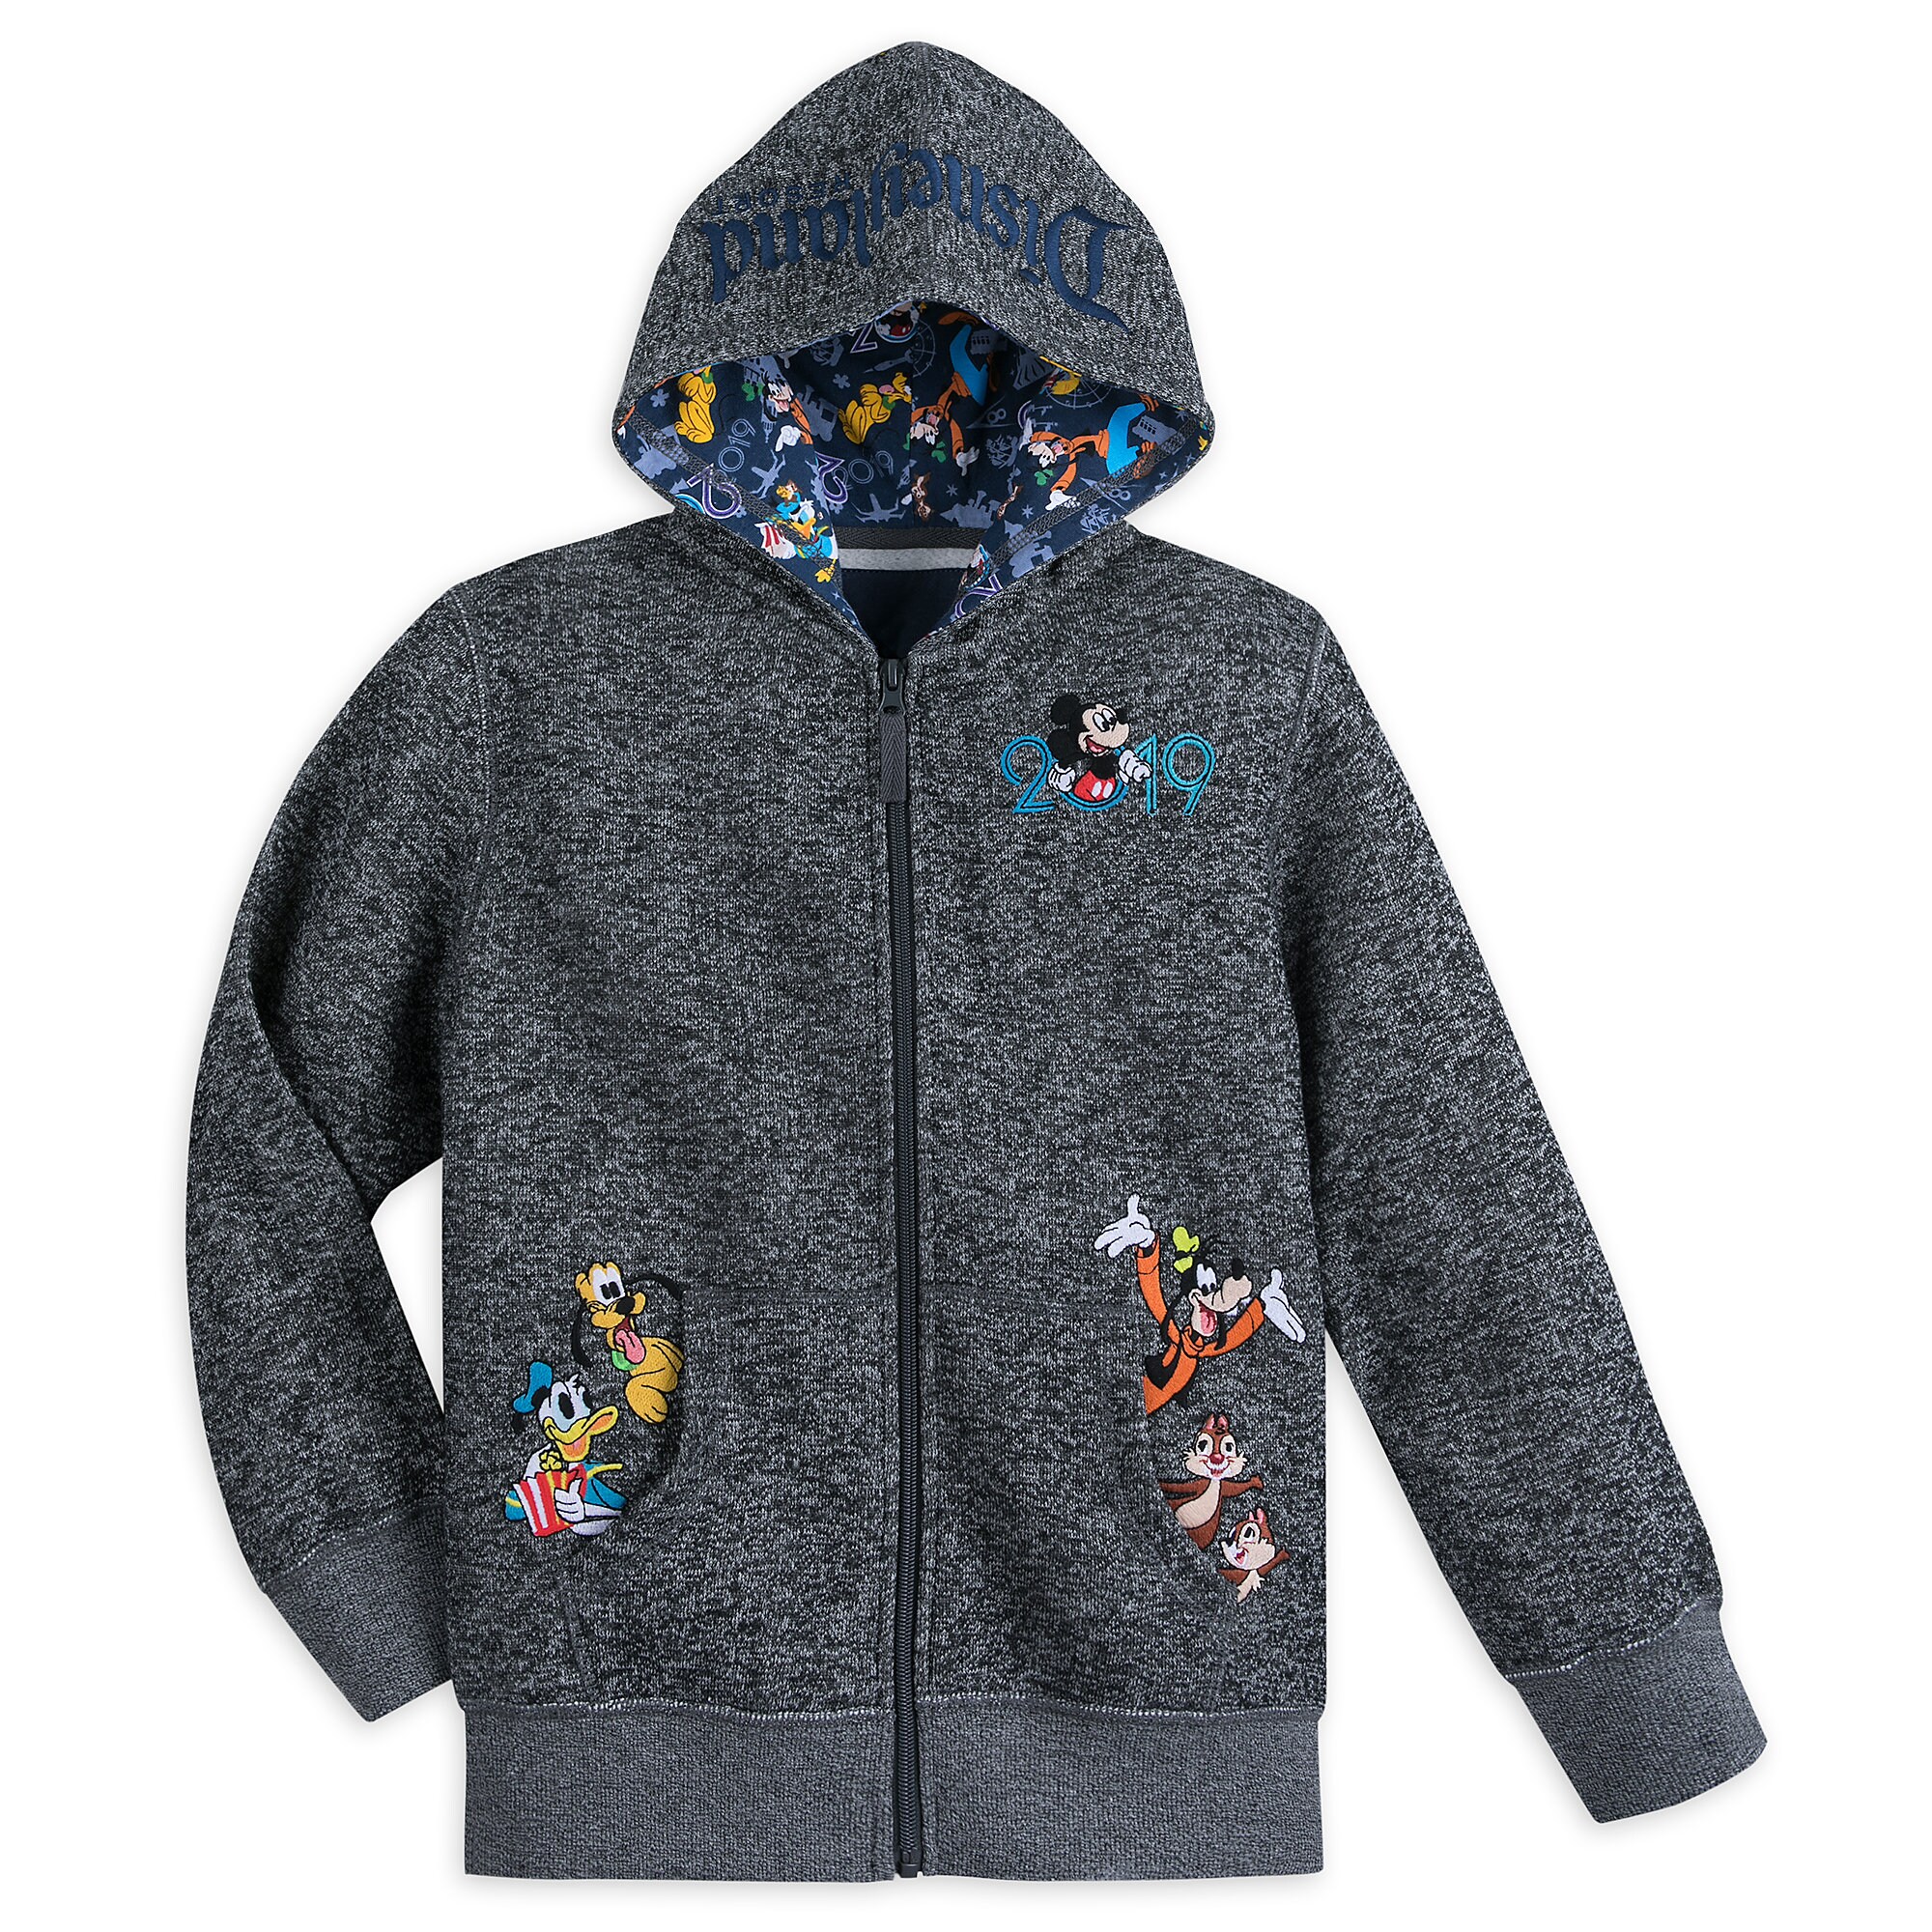 Mickey Mouse and Friends Knit Hoodie for Boys - Disneyland 2019